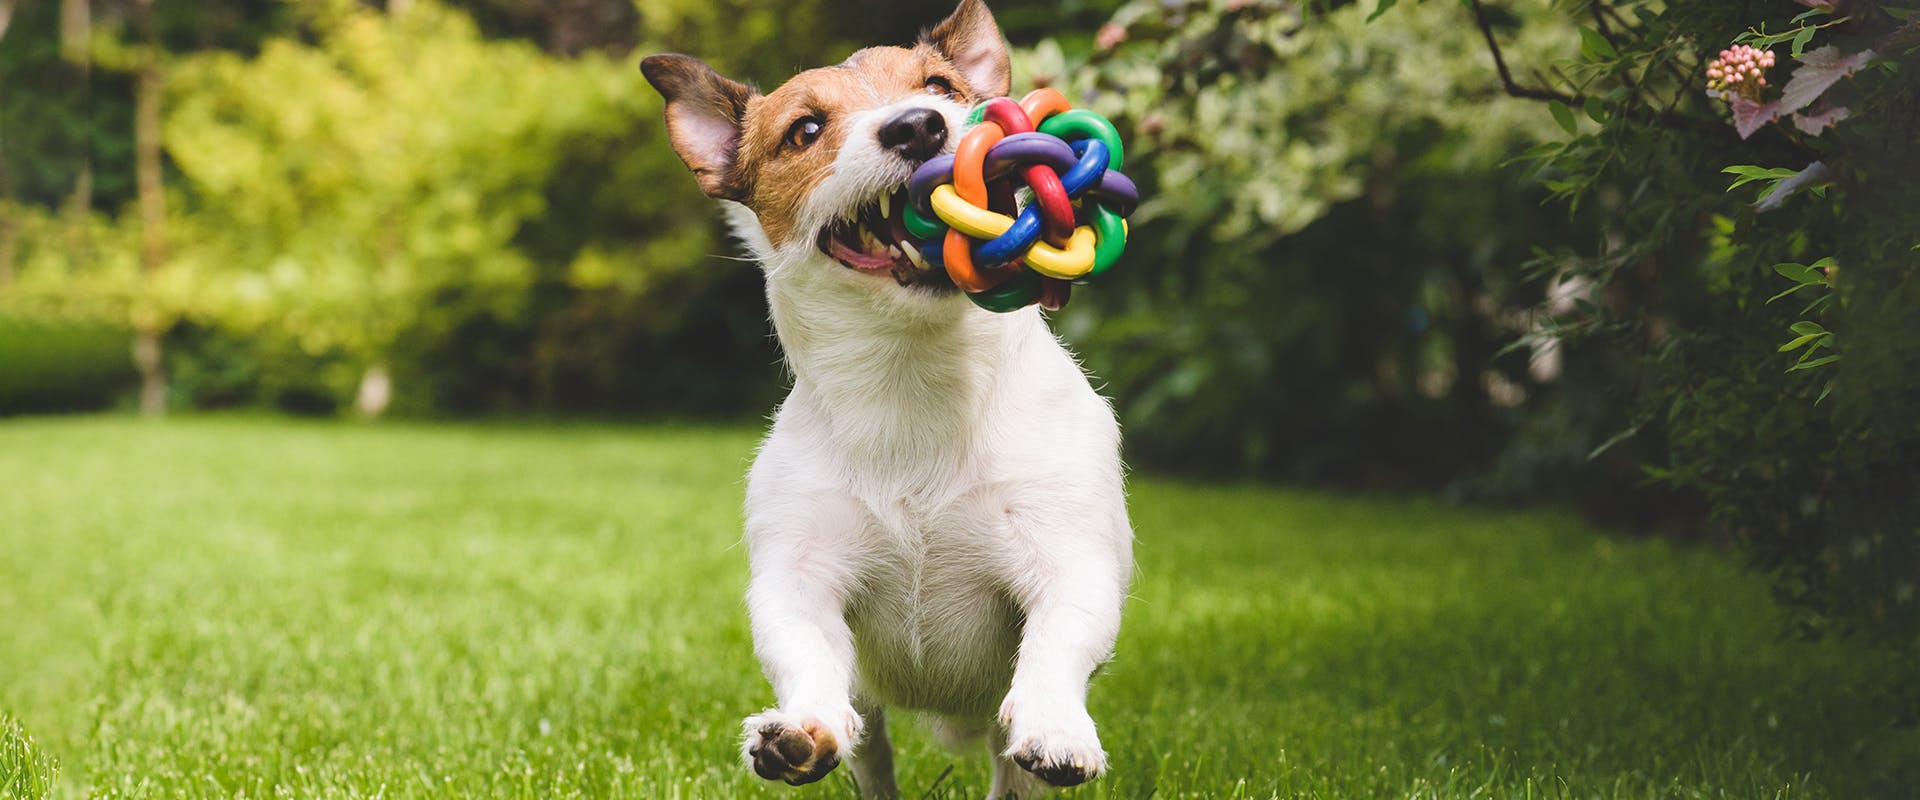 A cute Jack Russell puppy running through grass, a brightly coloured chew toy in its mouth